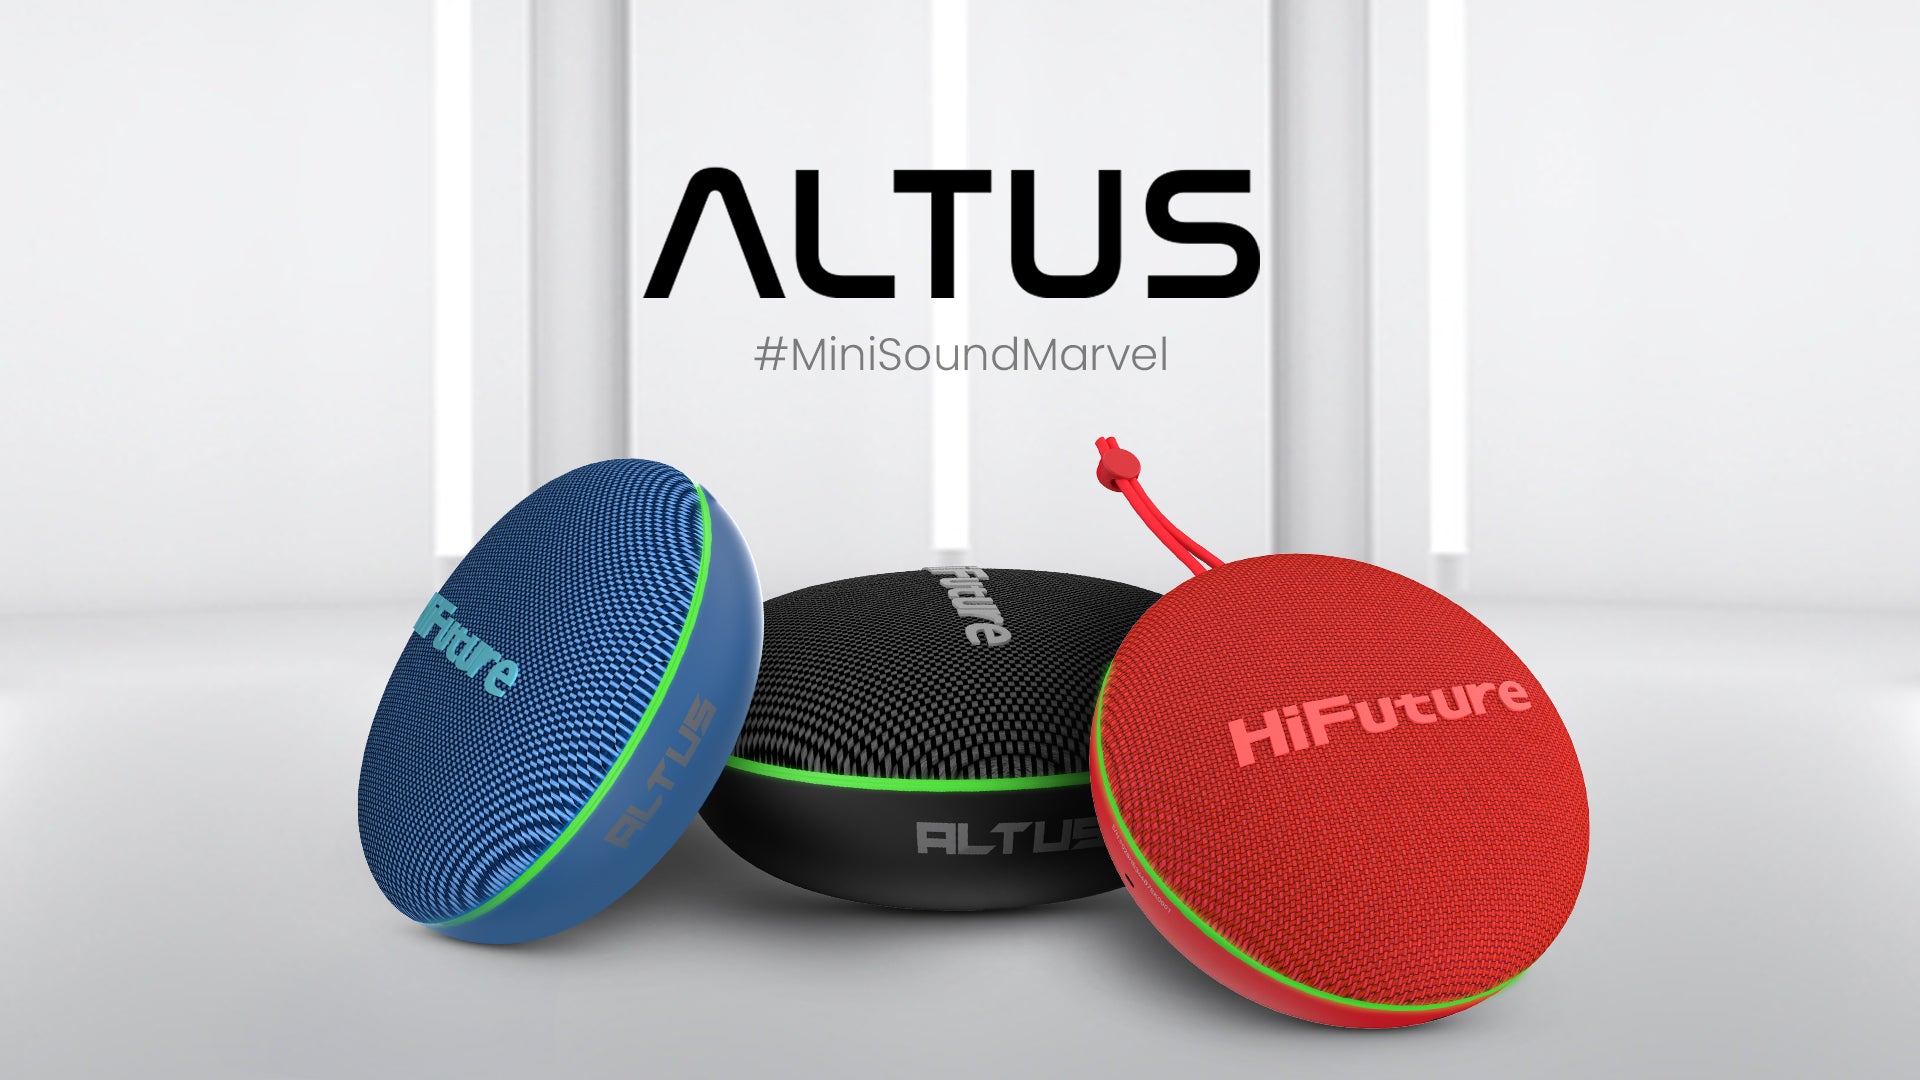 HiFuture’s Ultra-Portable Wireless Speaker ALTUS is Your Perfect Travel Partner